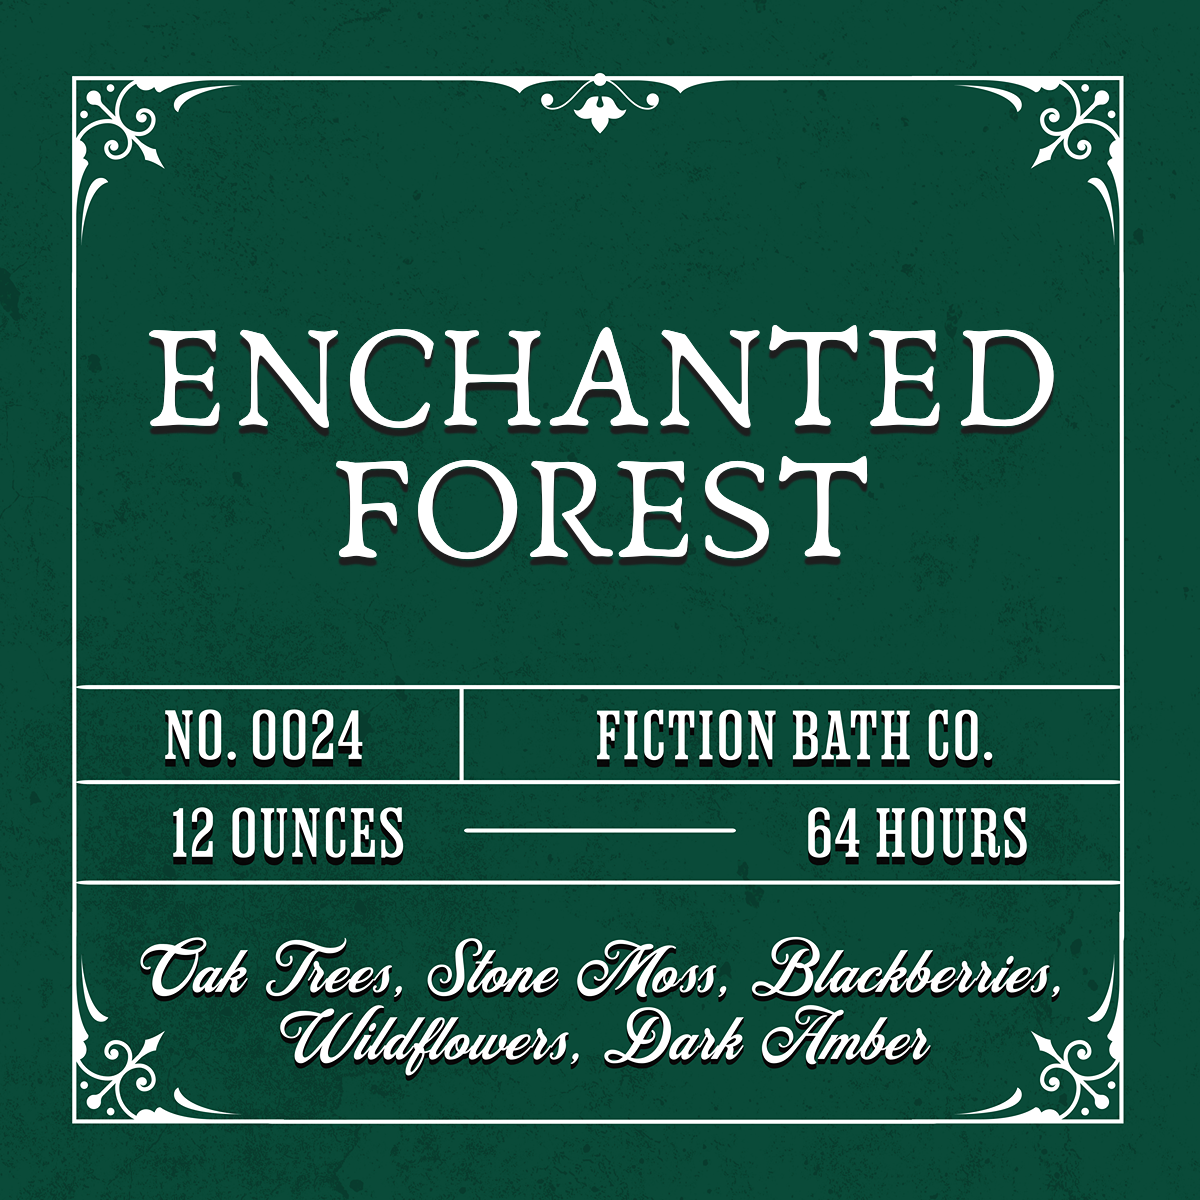 NO. 0024 ENCHANTED FOREST